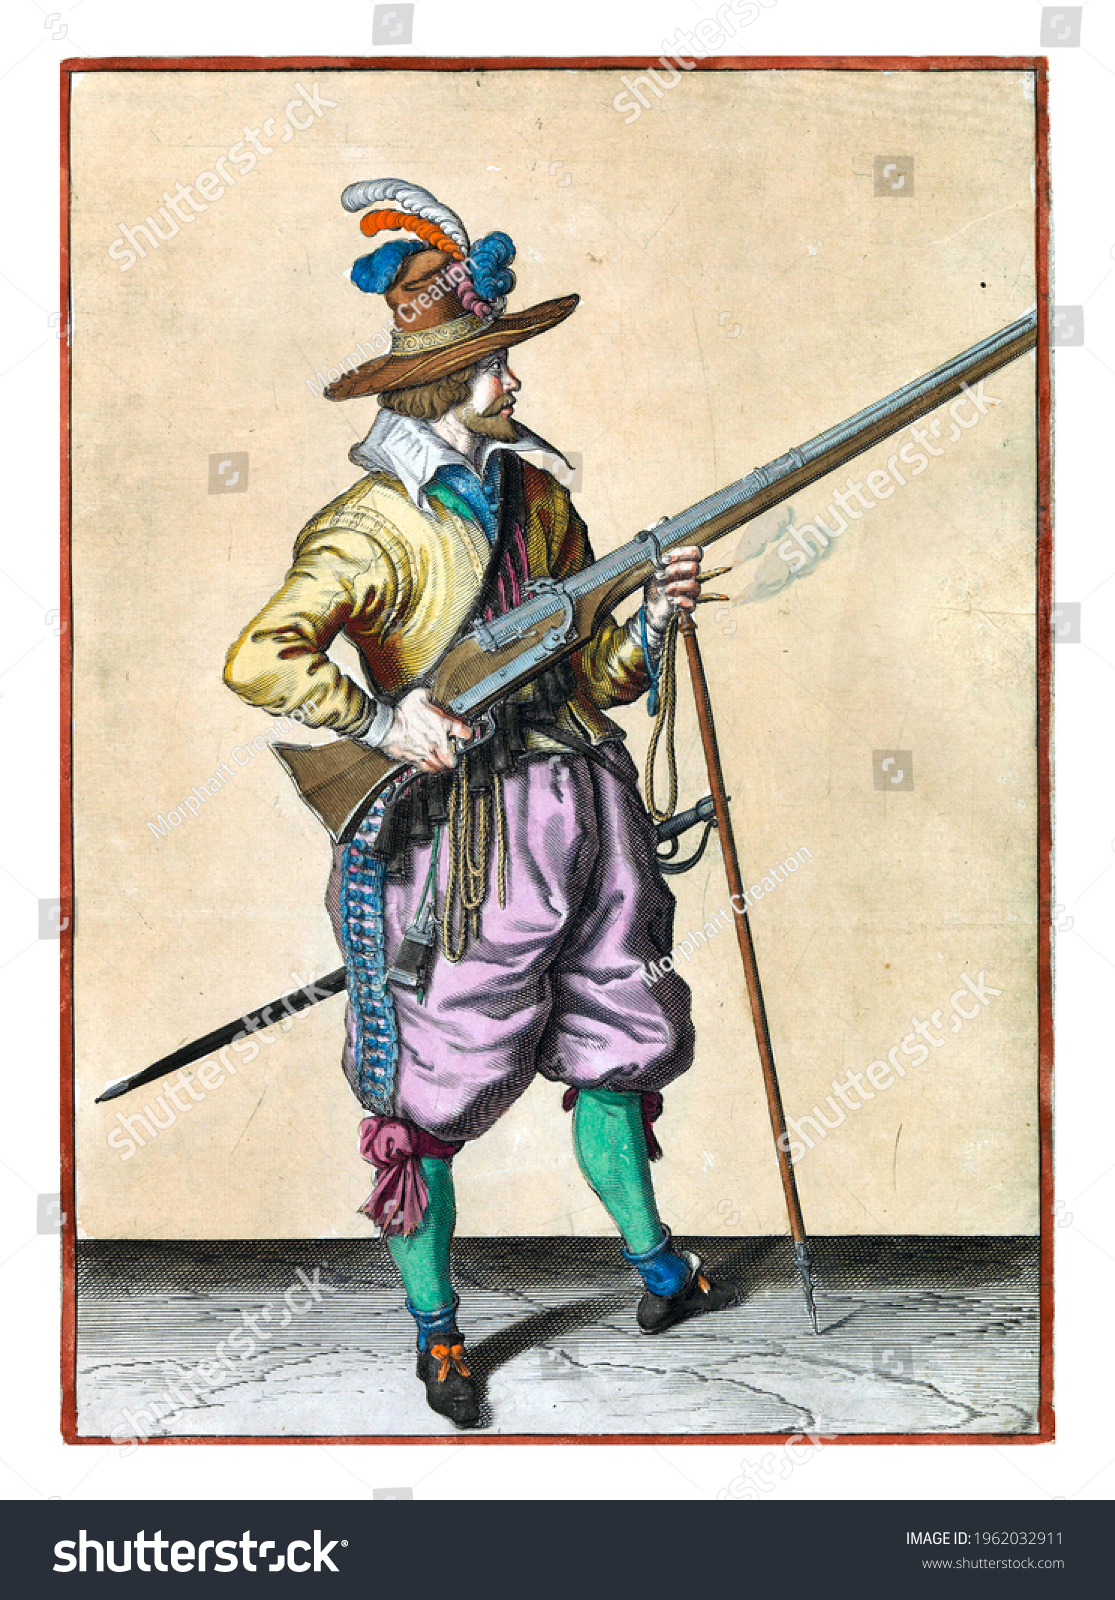 A soldier on guard, full-length, to the right, holding a musket (a certain type of firearm) by his right side, his right index finger on the trigger, his left hand around the fork of the furket #1962032911